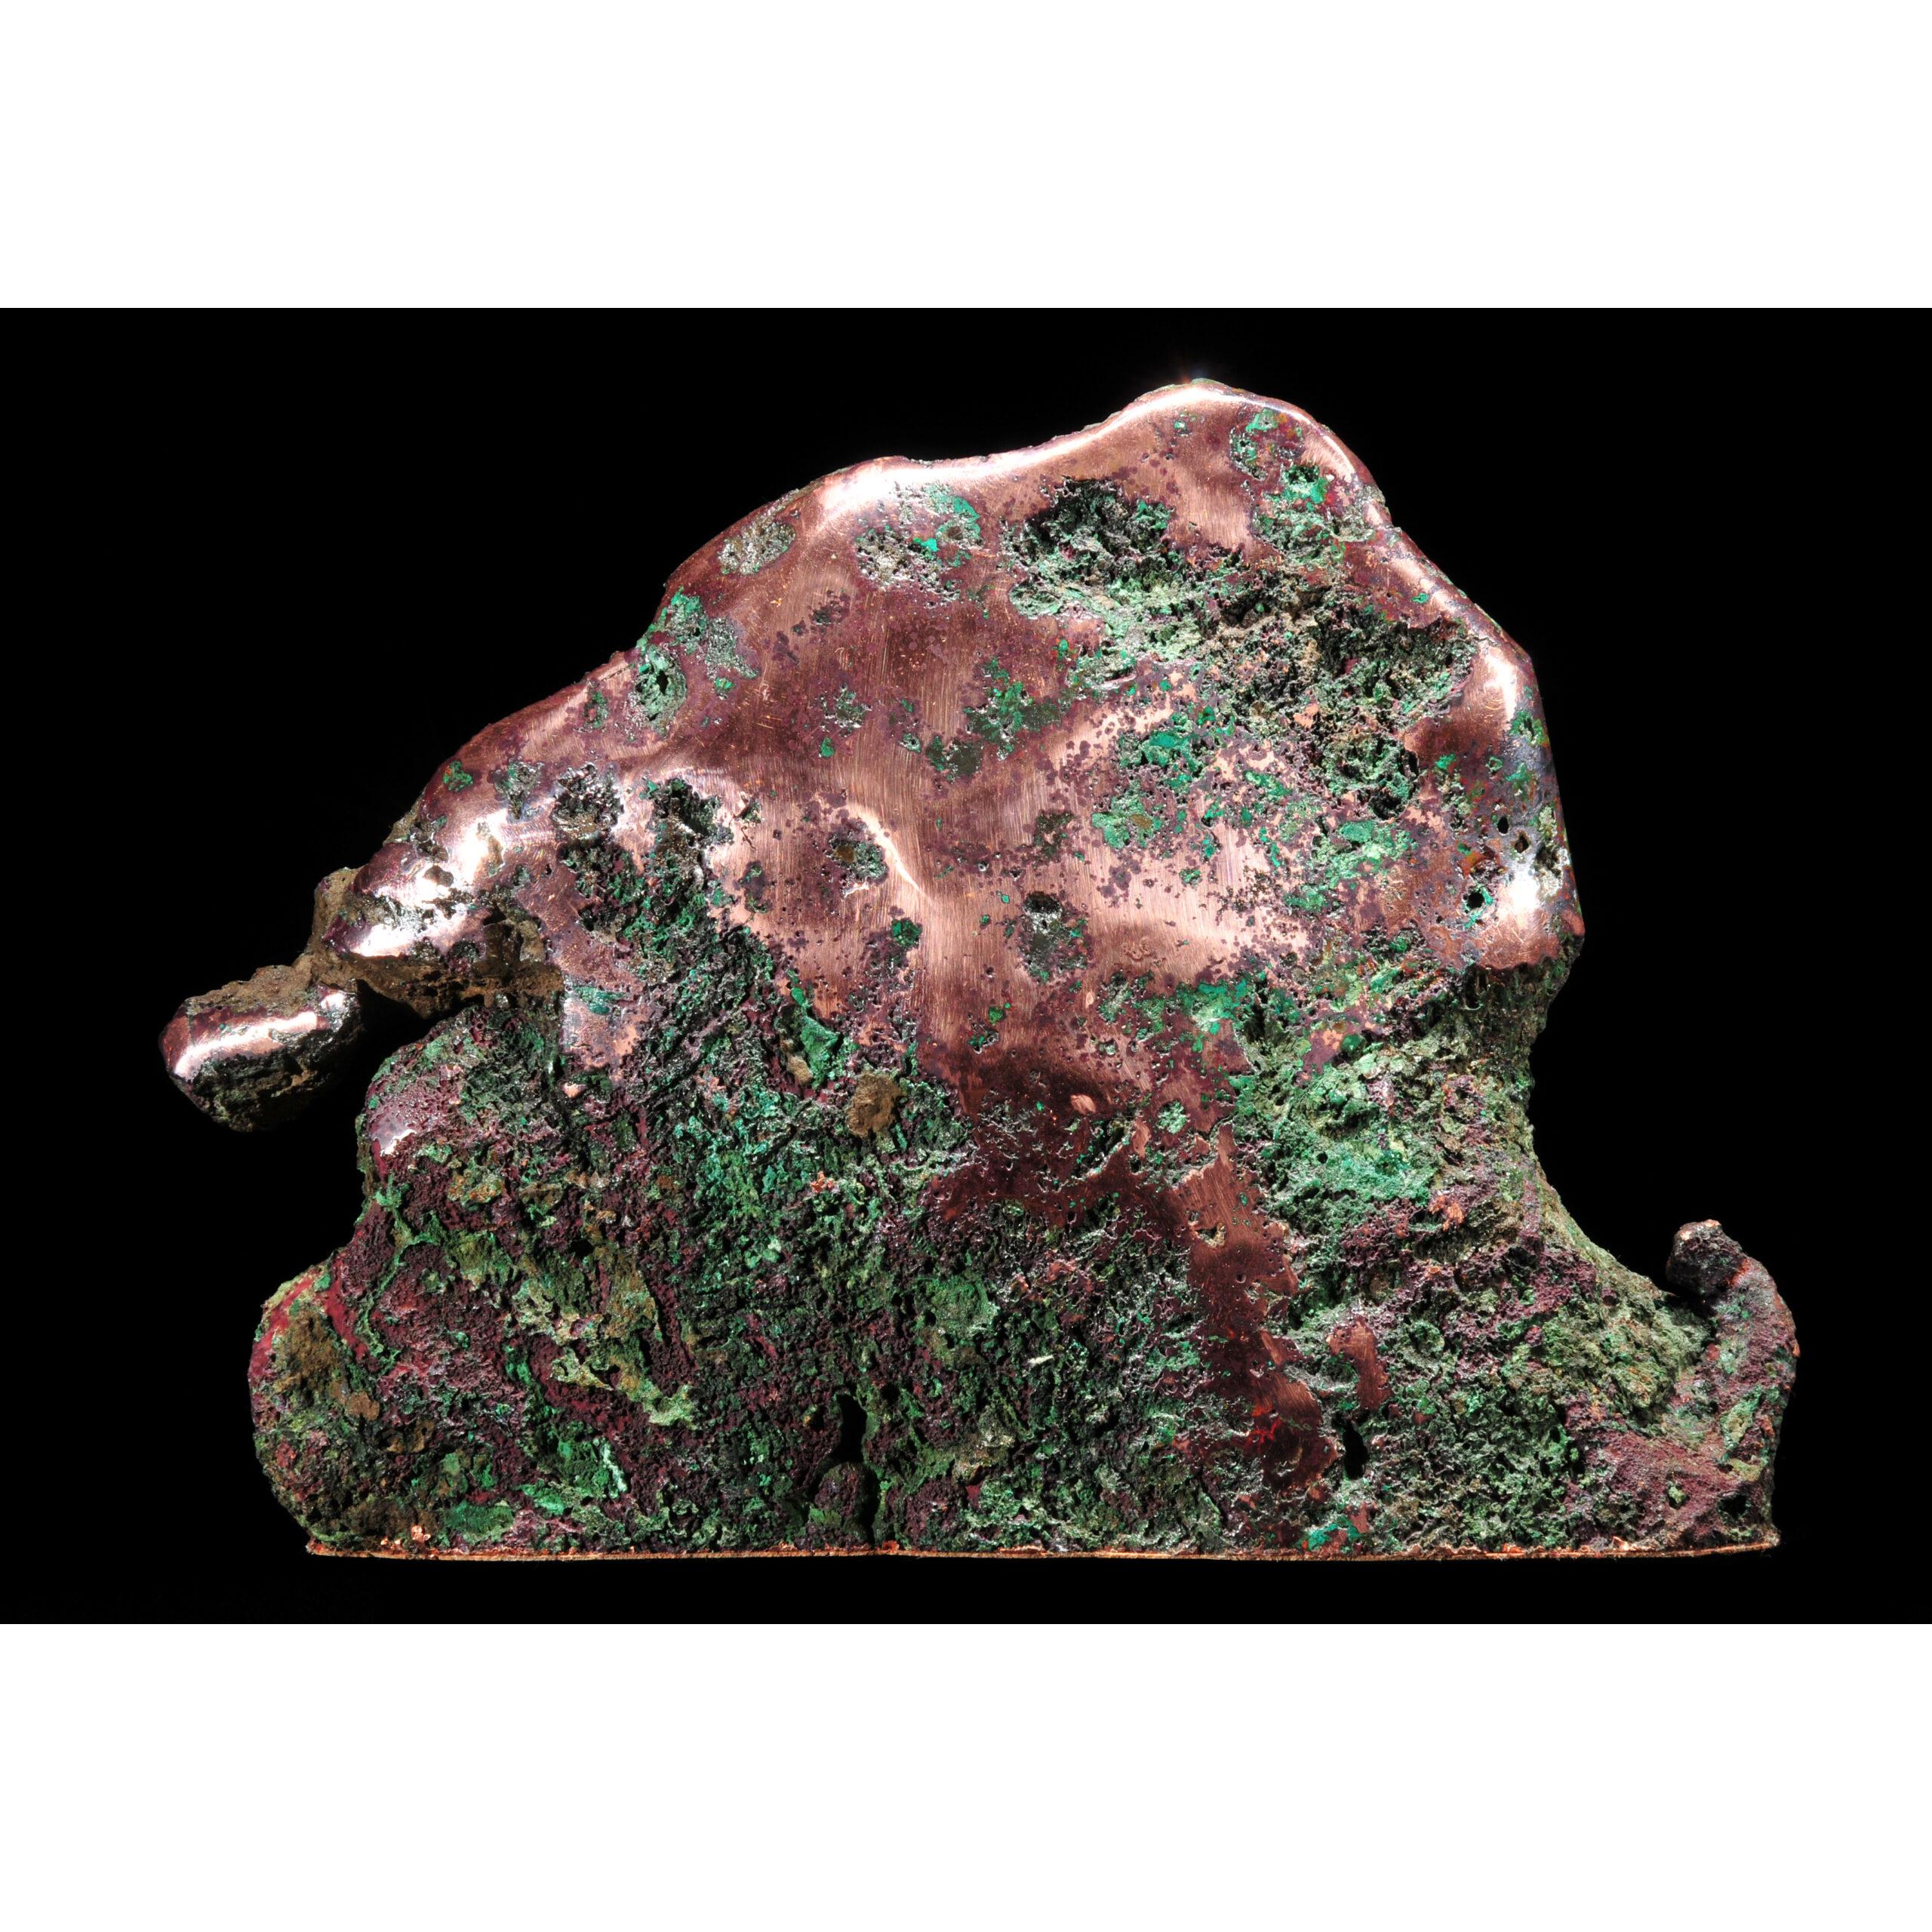 This is a picture of a piece of polished copper, containing a small amount of oxidization.